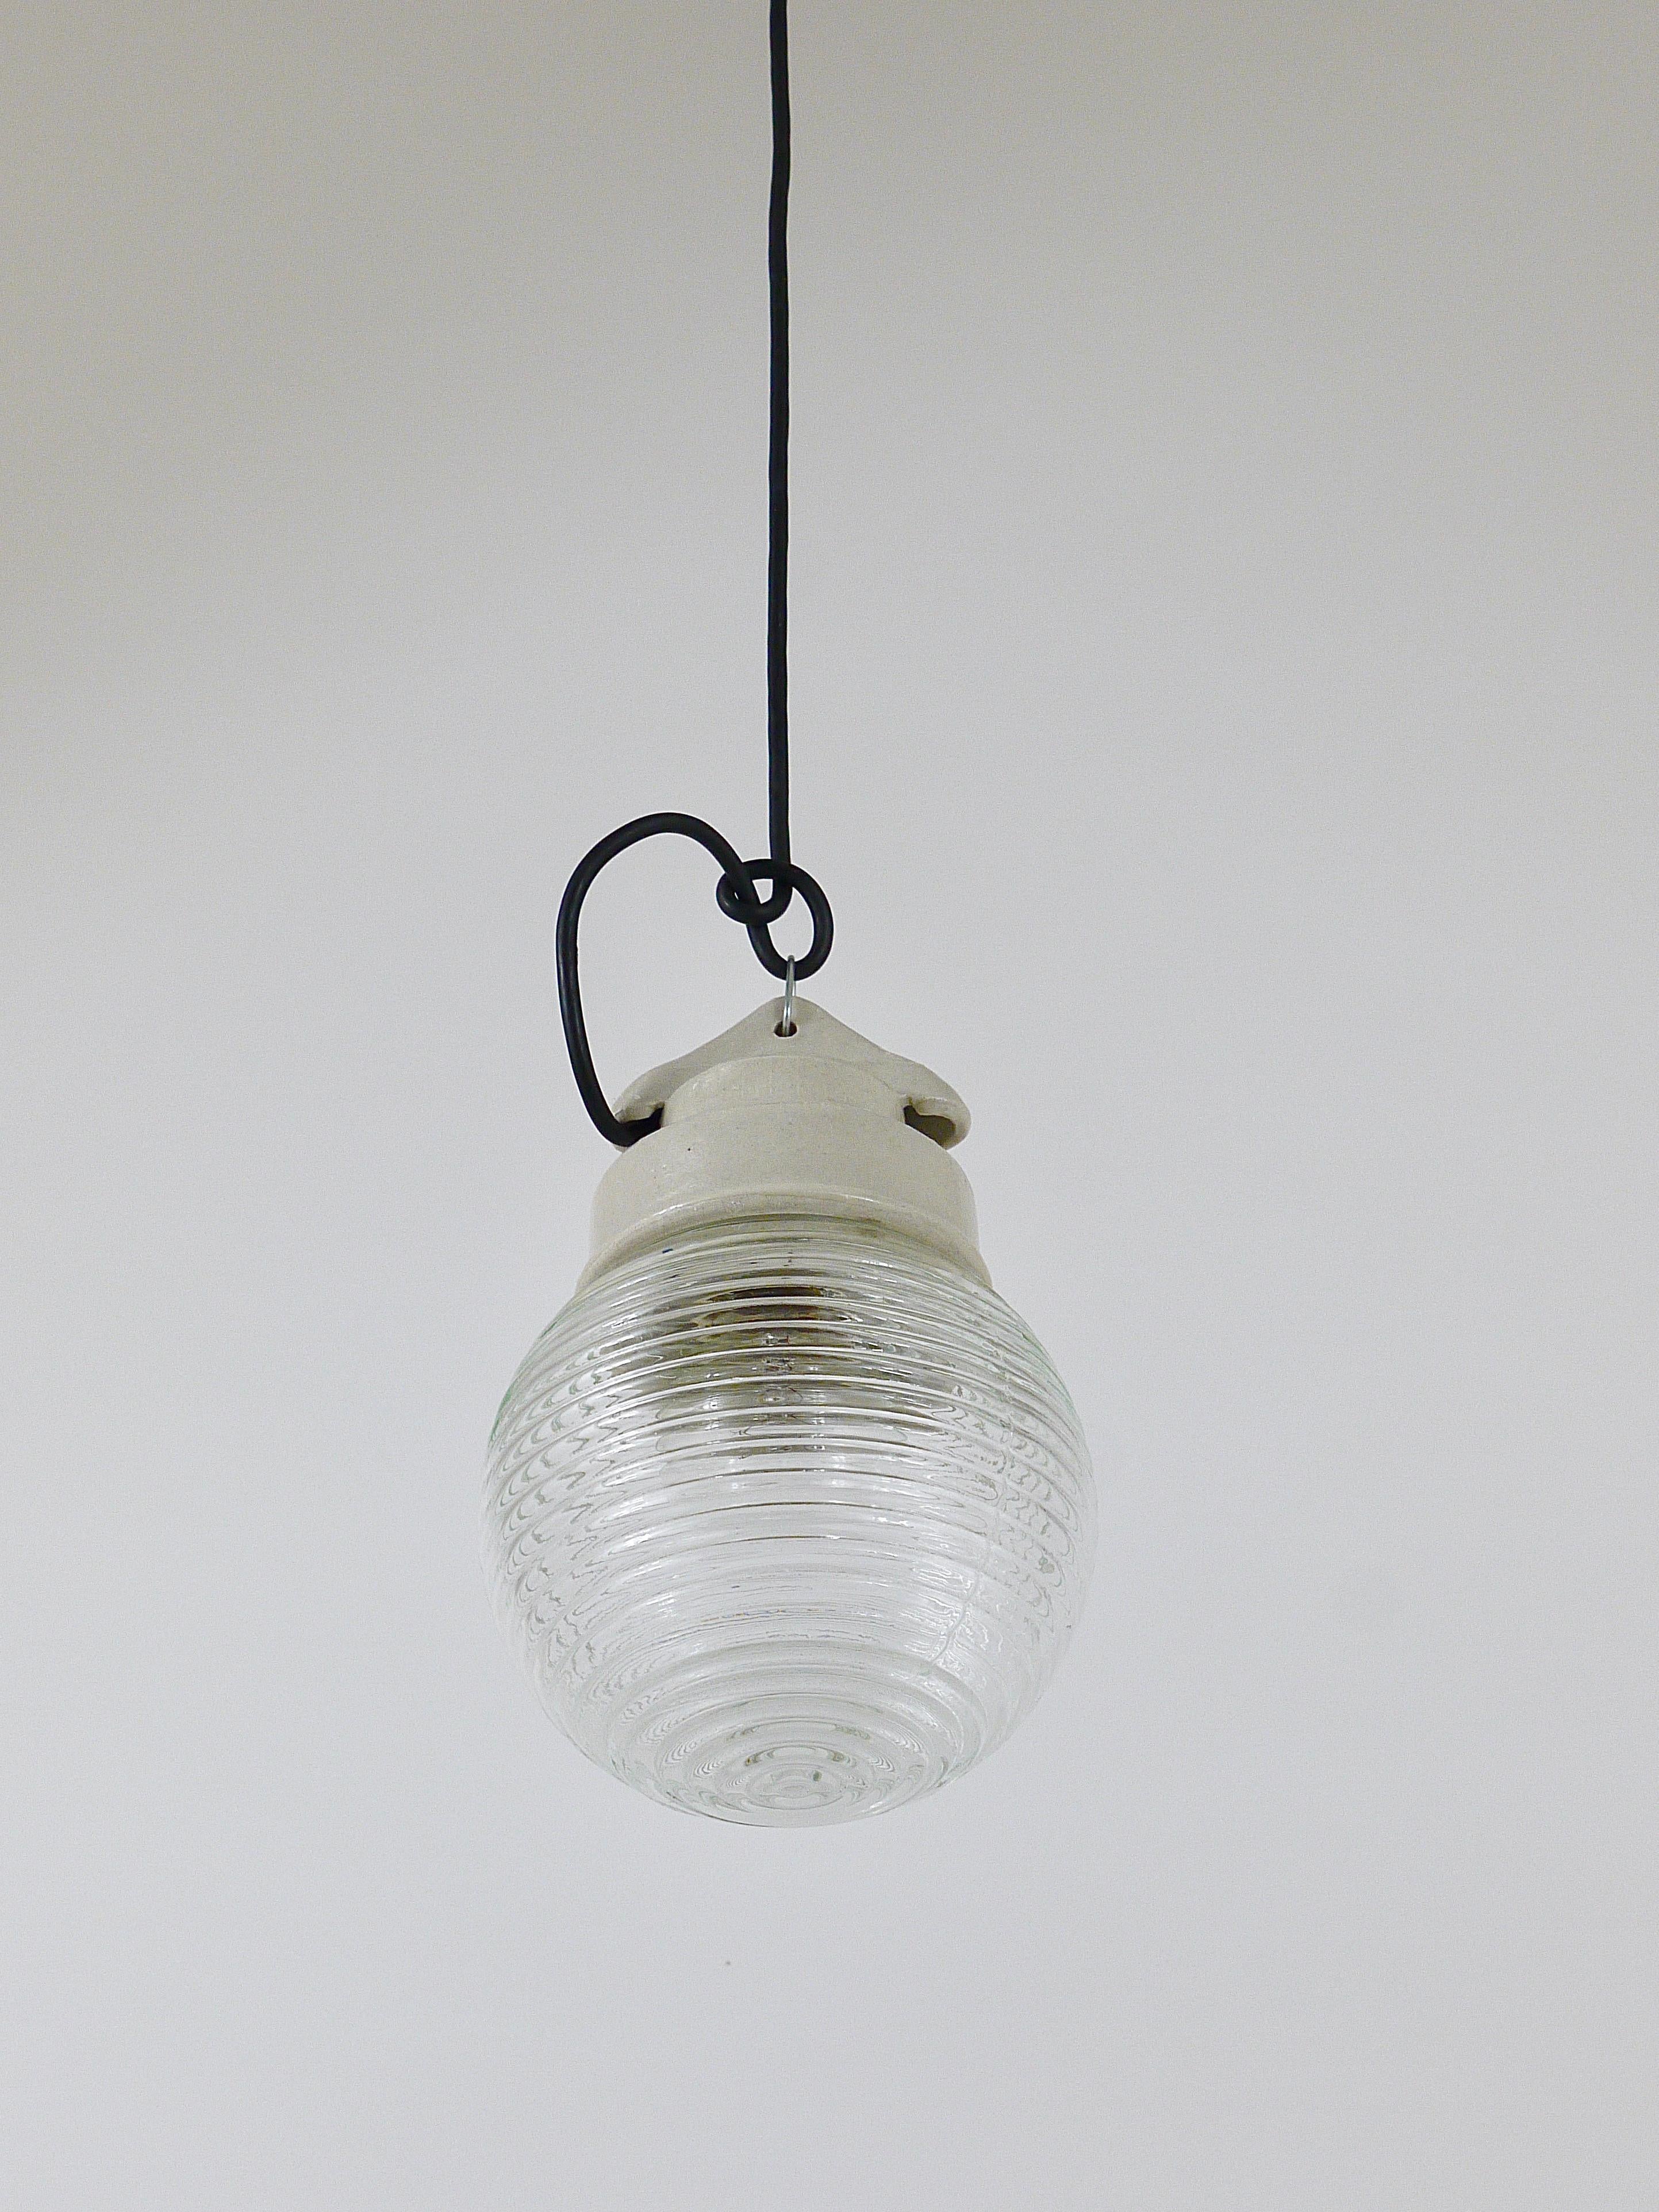 Up to 6 Unused Holophane Porcelain Honey Jar Industrial Pendant Lights In Excellent Condition For Sale In Vienna, AT